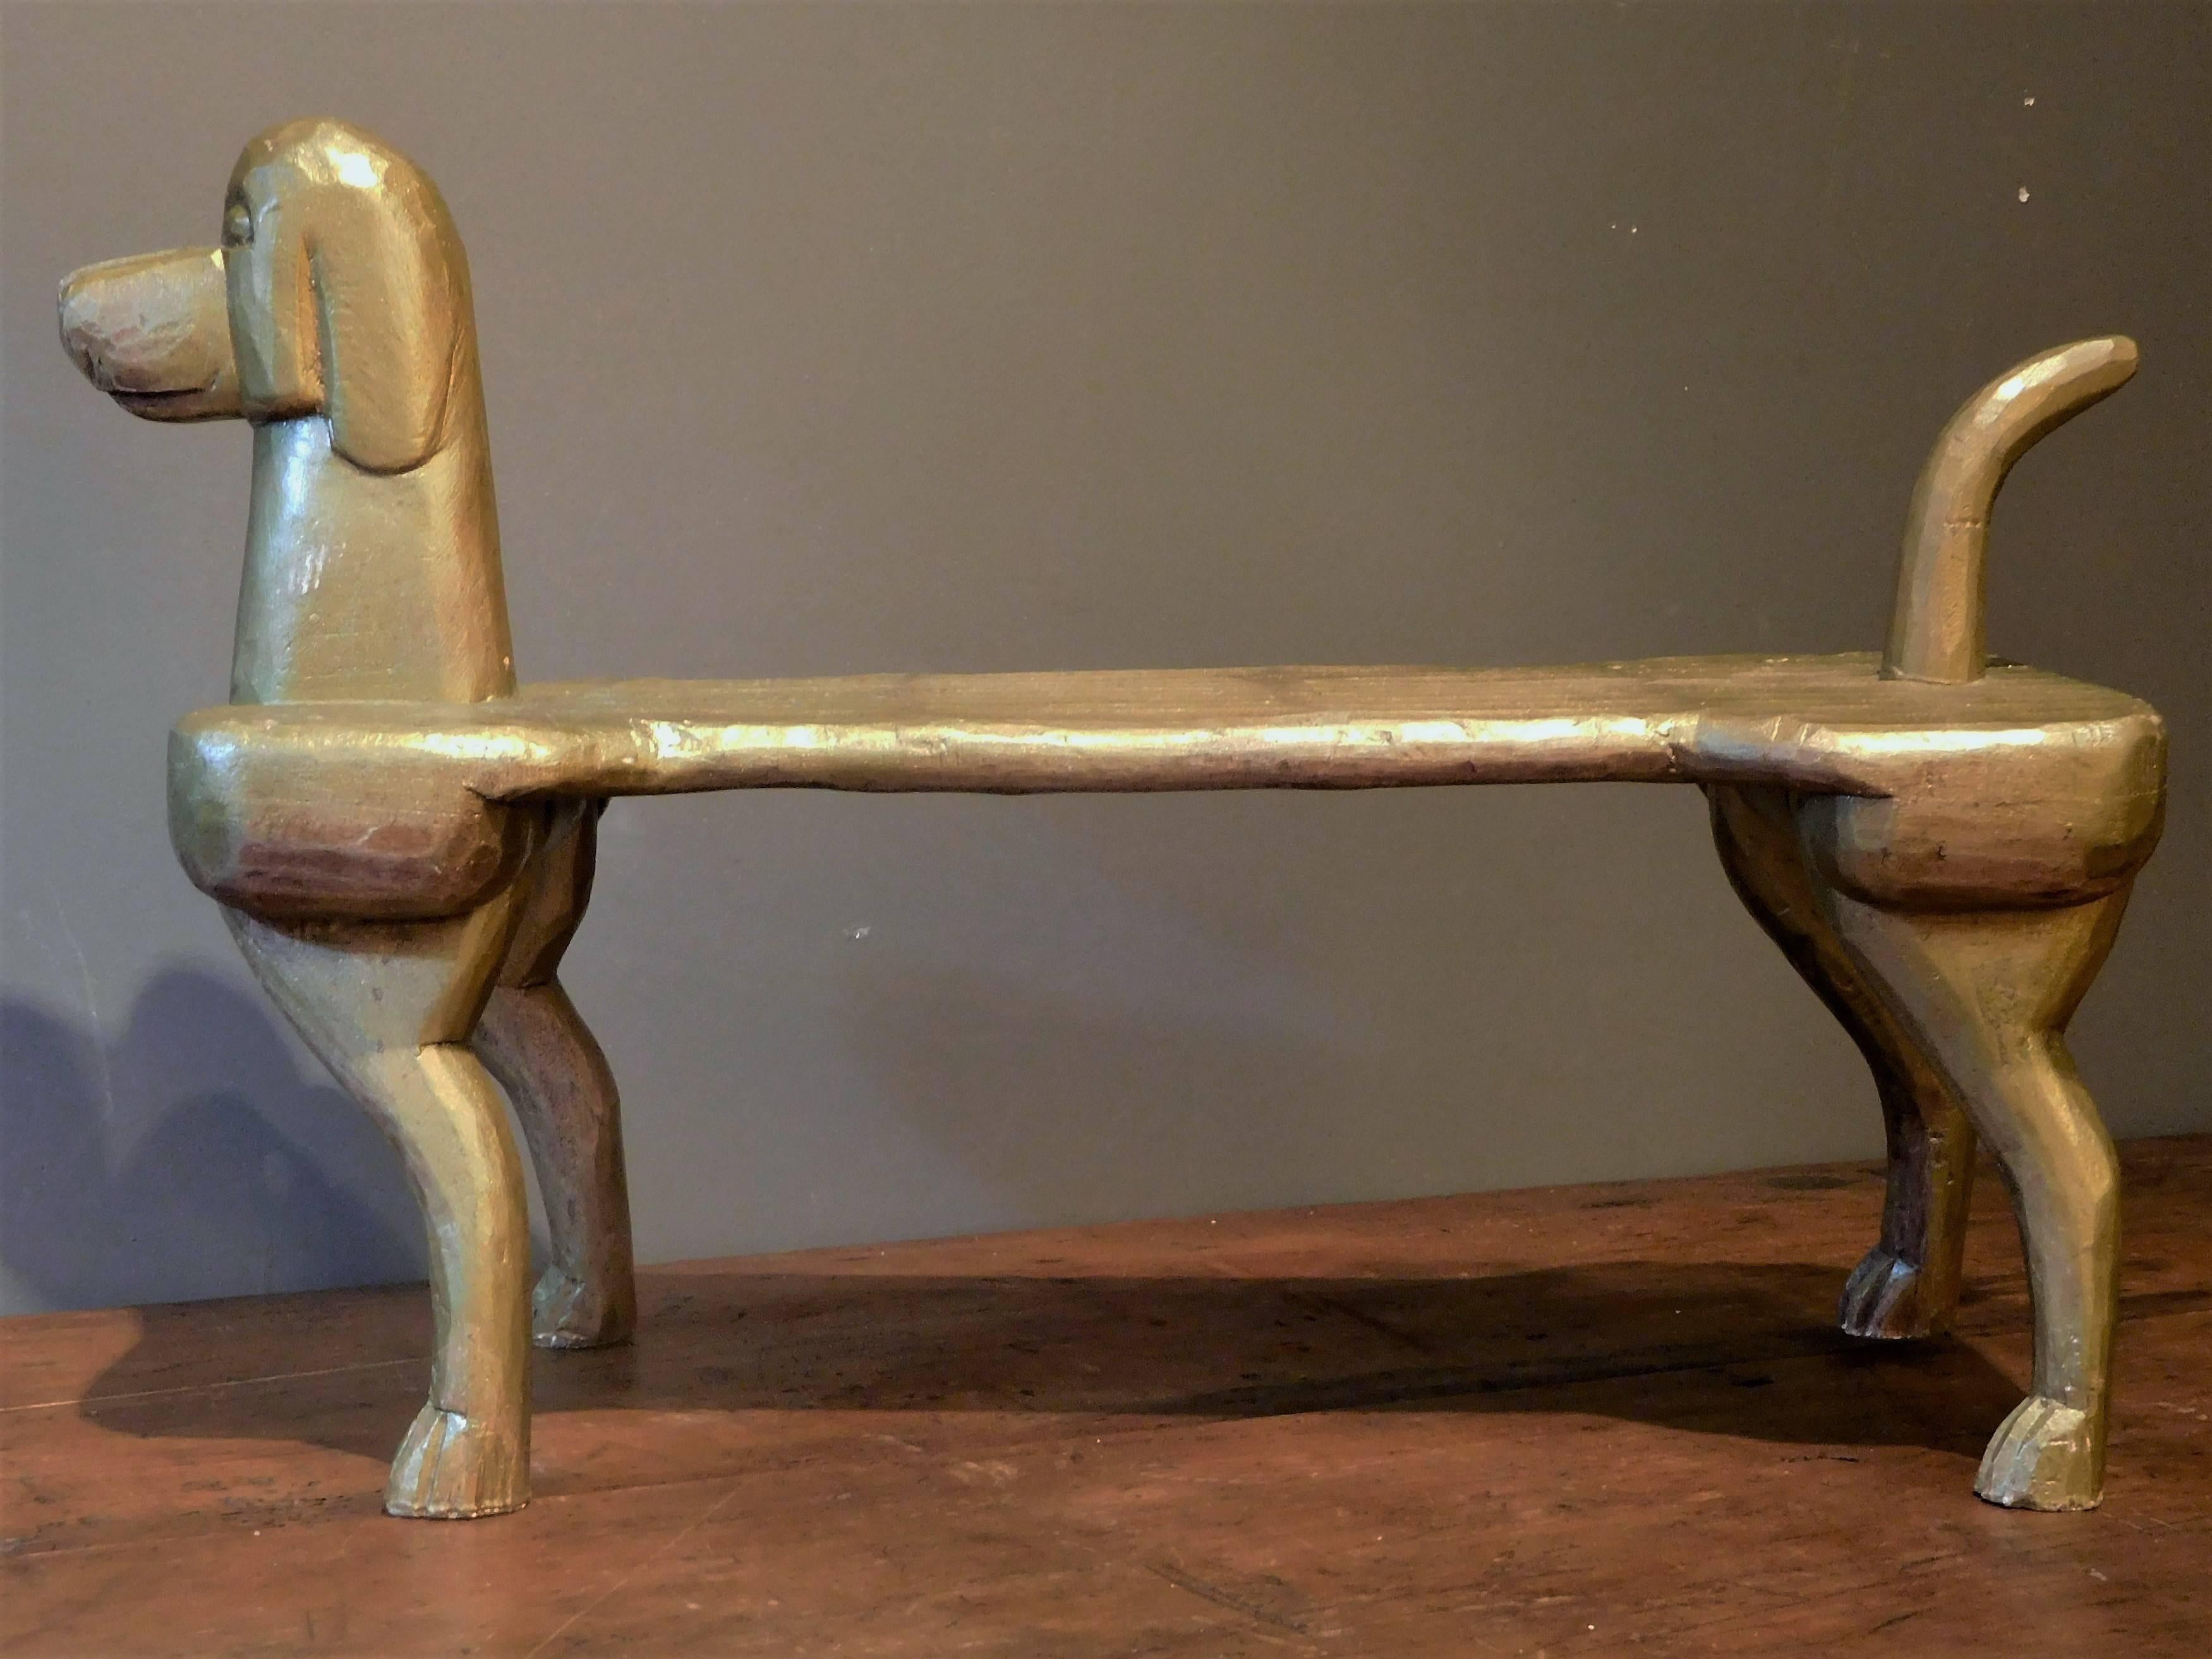 This hand-carved, gold-painted wooden footstool, a sculpture of a glorified dog, is attributed to the workshop of artist Stephen Huneck at Dog Mountain in St. Johnsbury, Vermont. It exemplifies Huneck's love of dogs and his humorous and tolerant